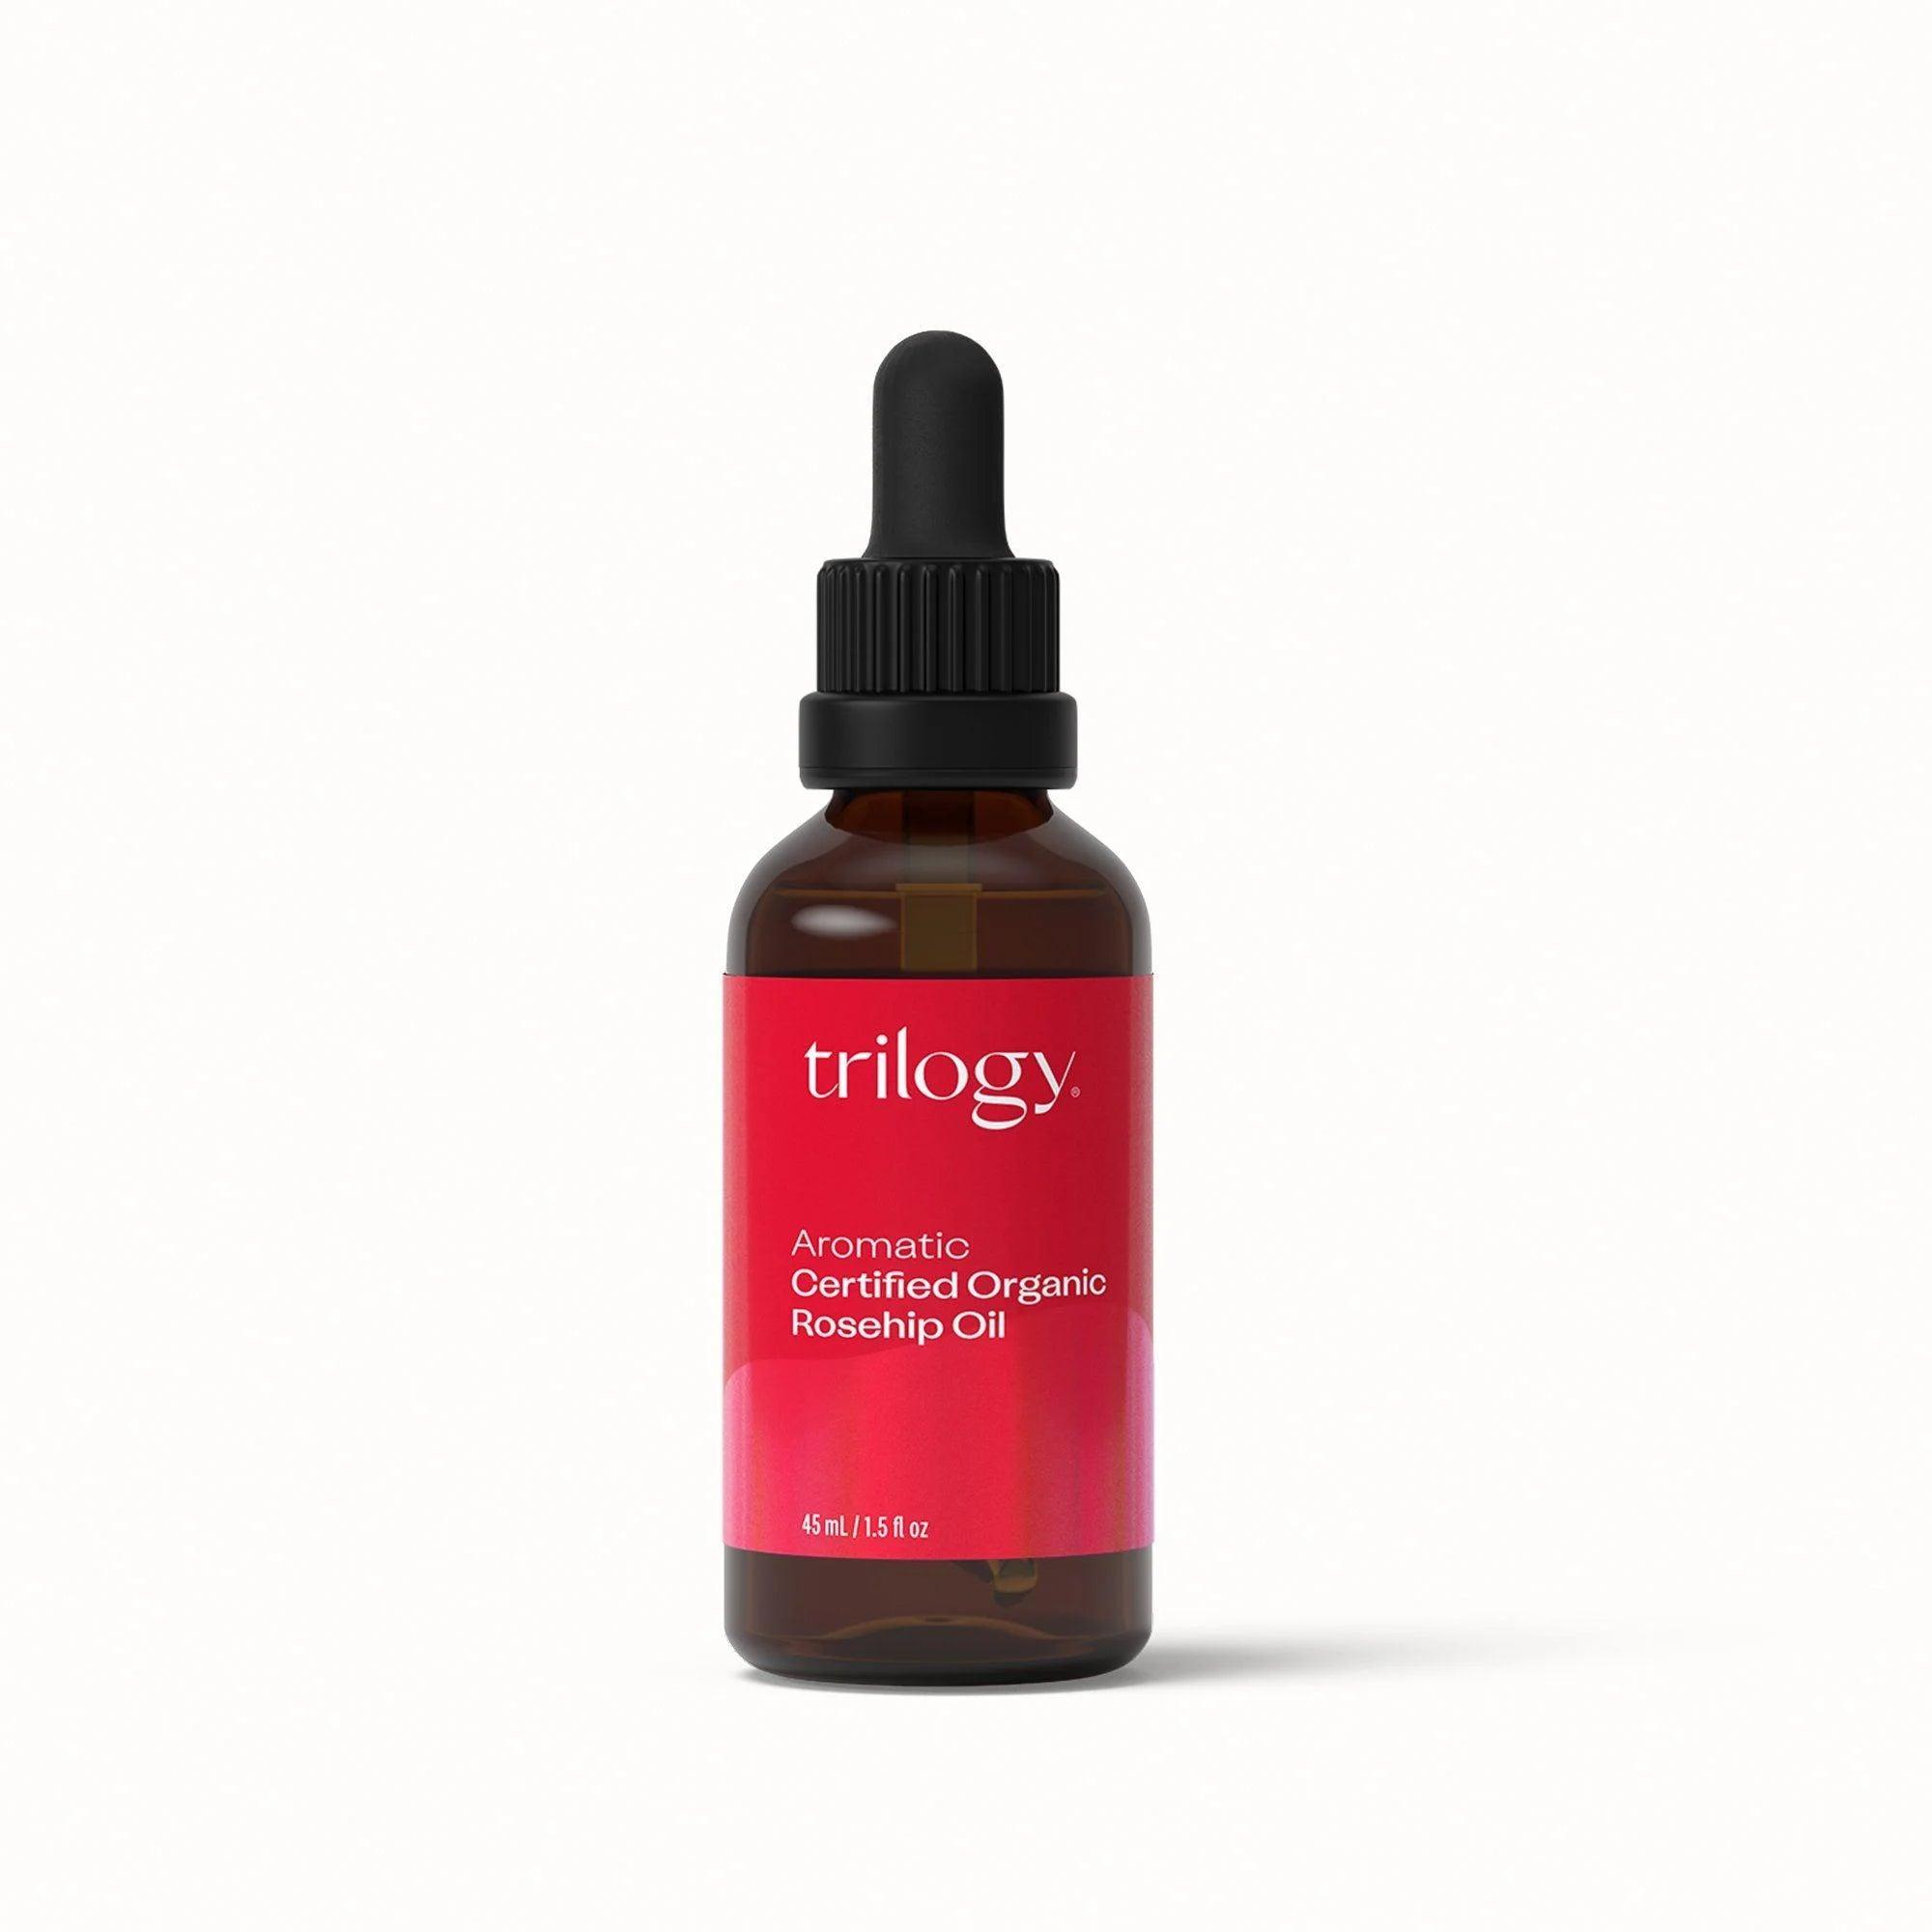 Trilogy Aromatic Certified Rosehip Oil 45ml by Love Nature